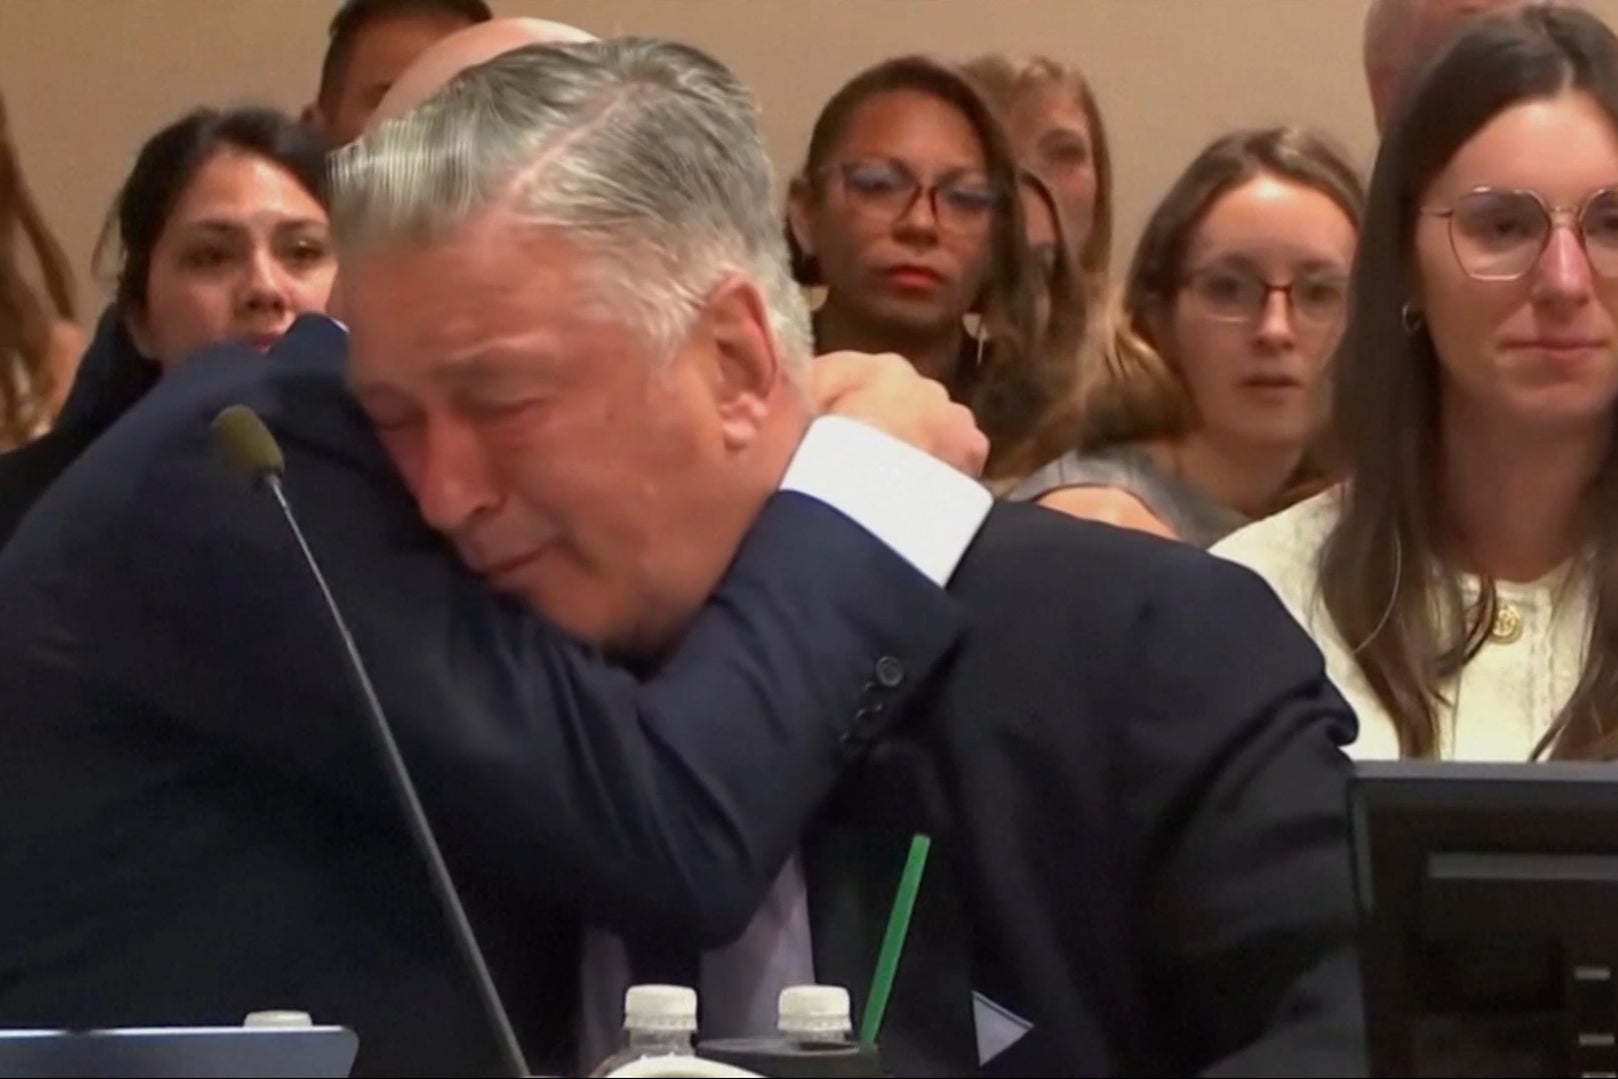 Hollywood star Alec Baldwin broke down in court after charges of involuntary manslaughter against him were dismissed